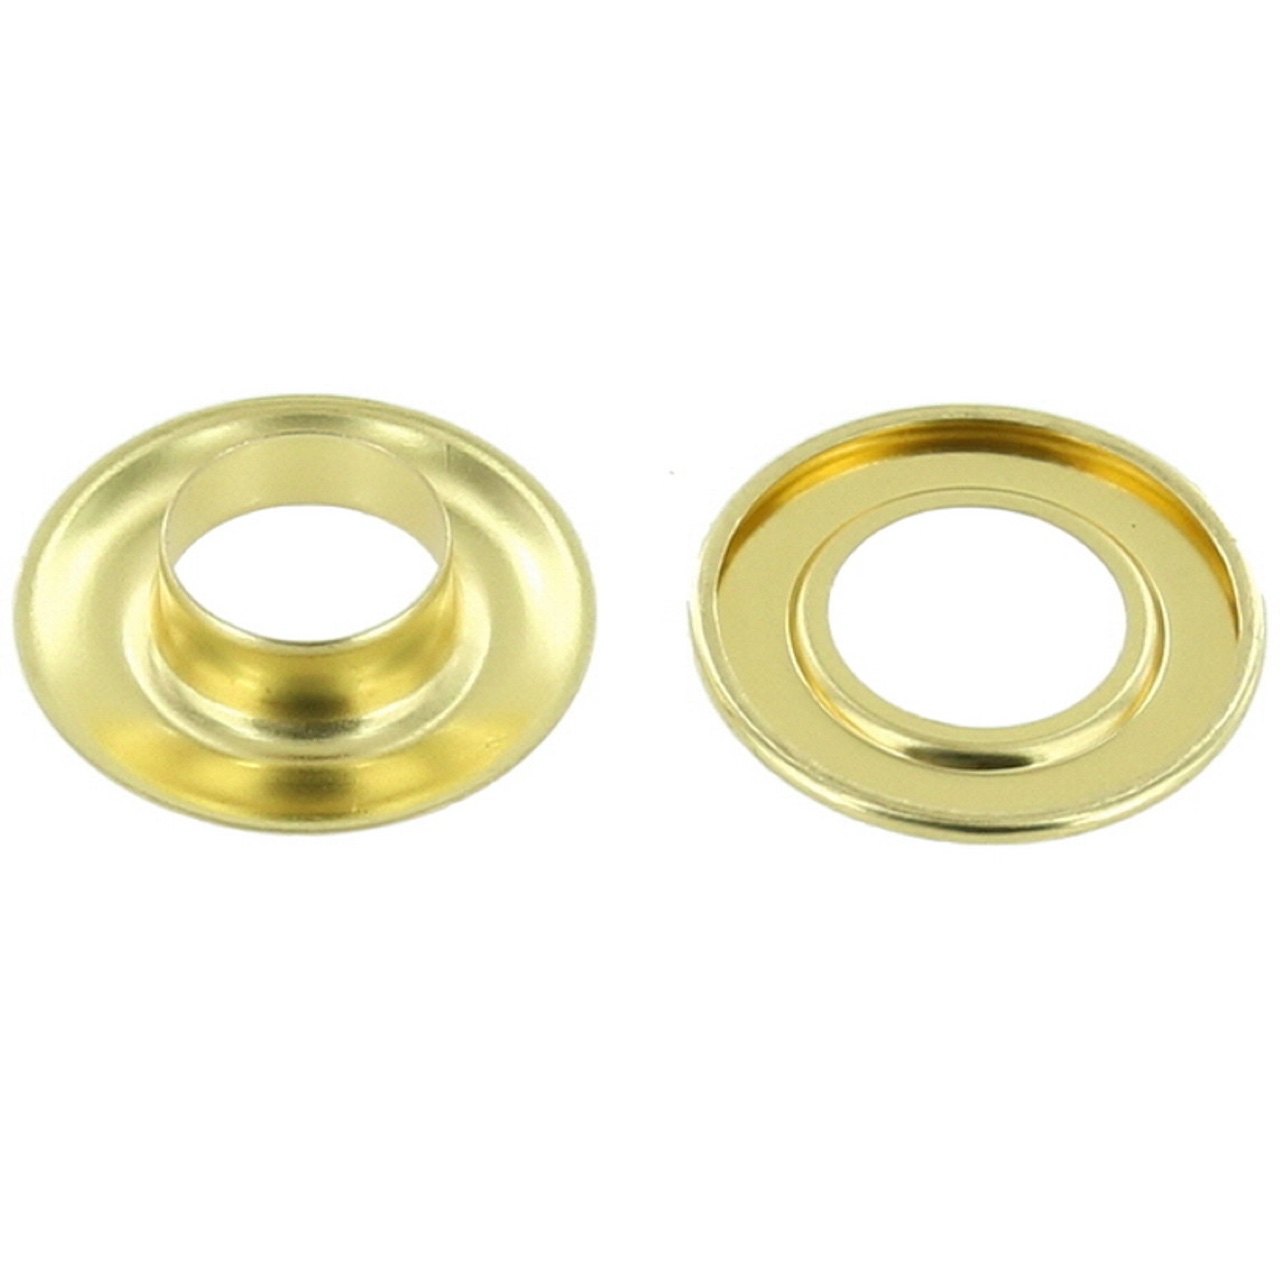 Uxcell 10.5 x 6 x 7mm Alloy Grommets Eyelets with Washers Brass Tone 100 Set